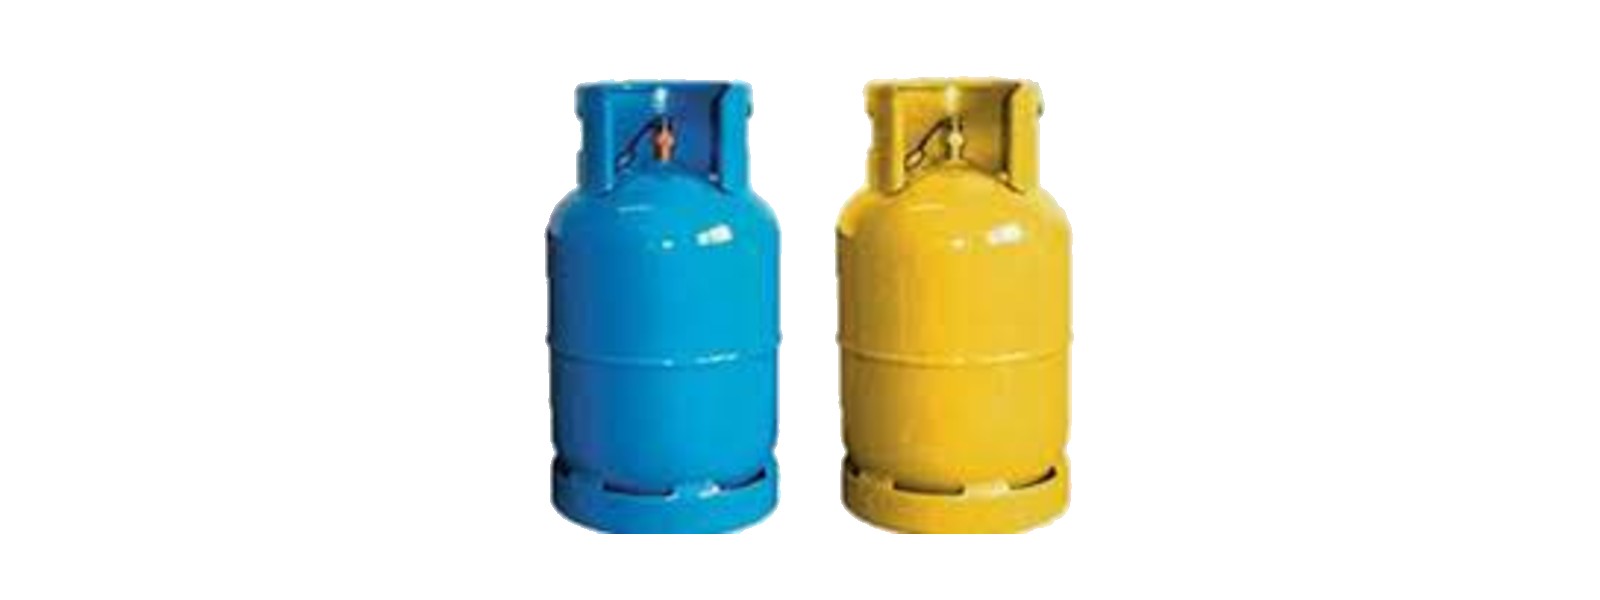 District-based MRP for Gas Cylinders of 18 litres